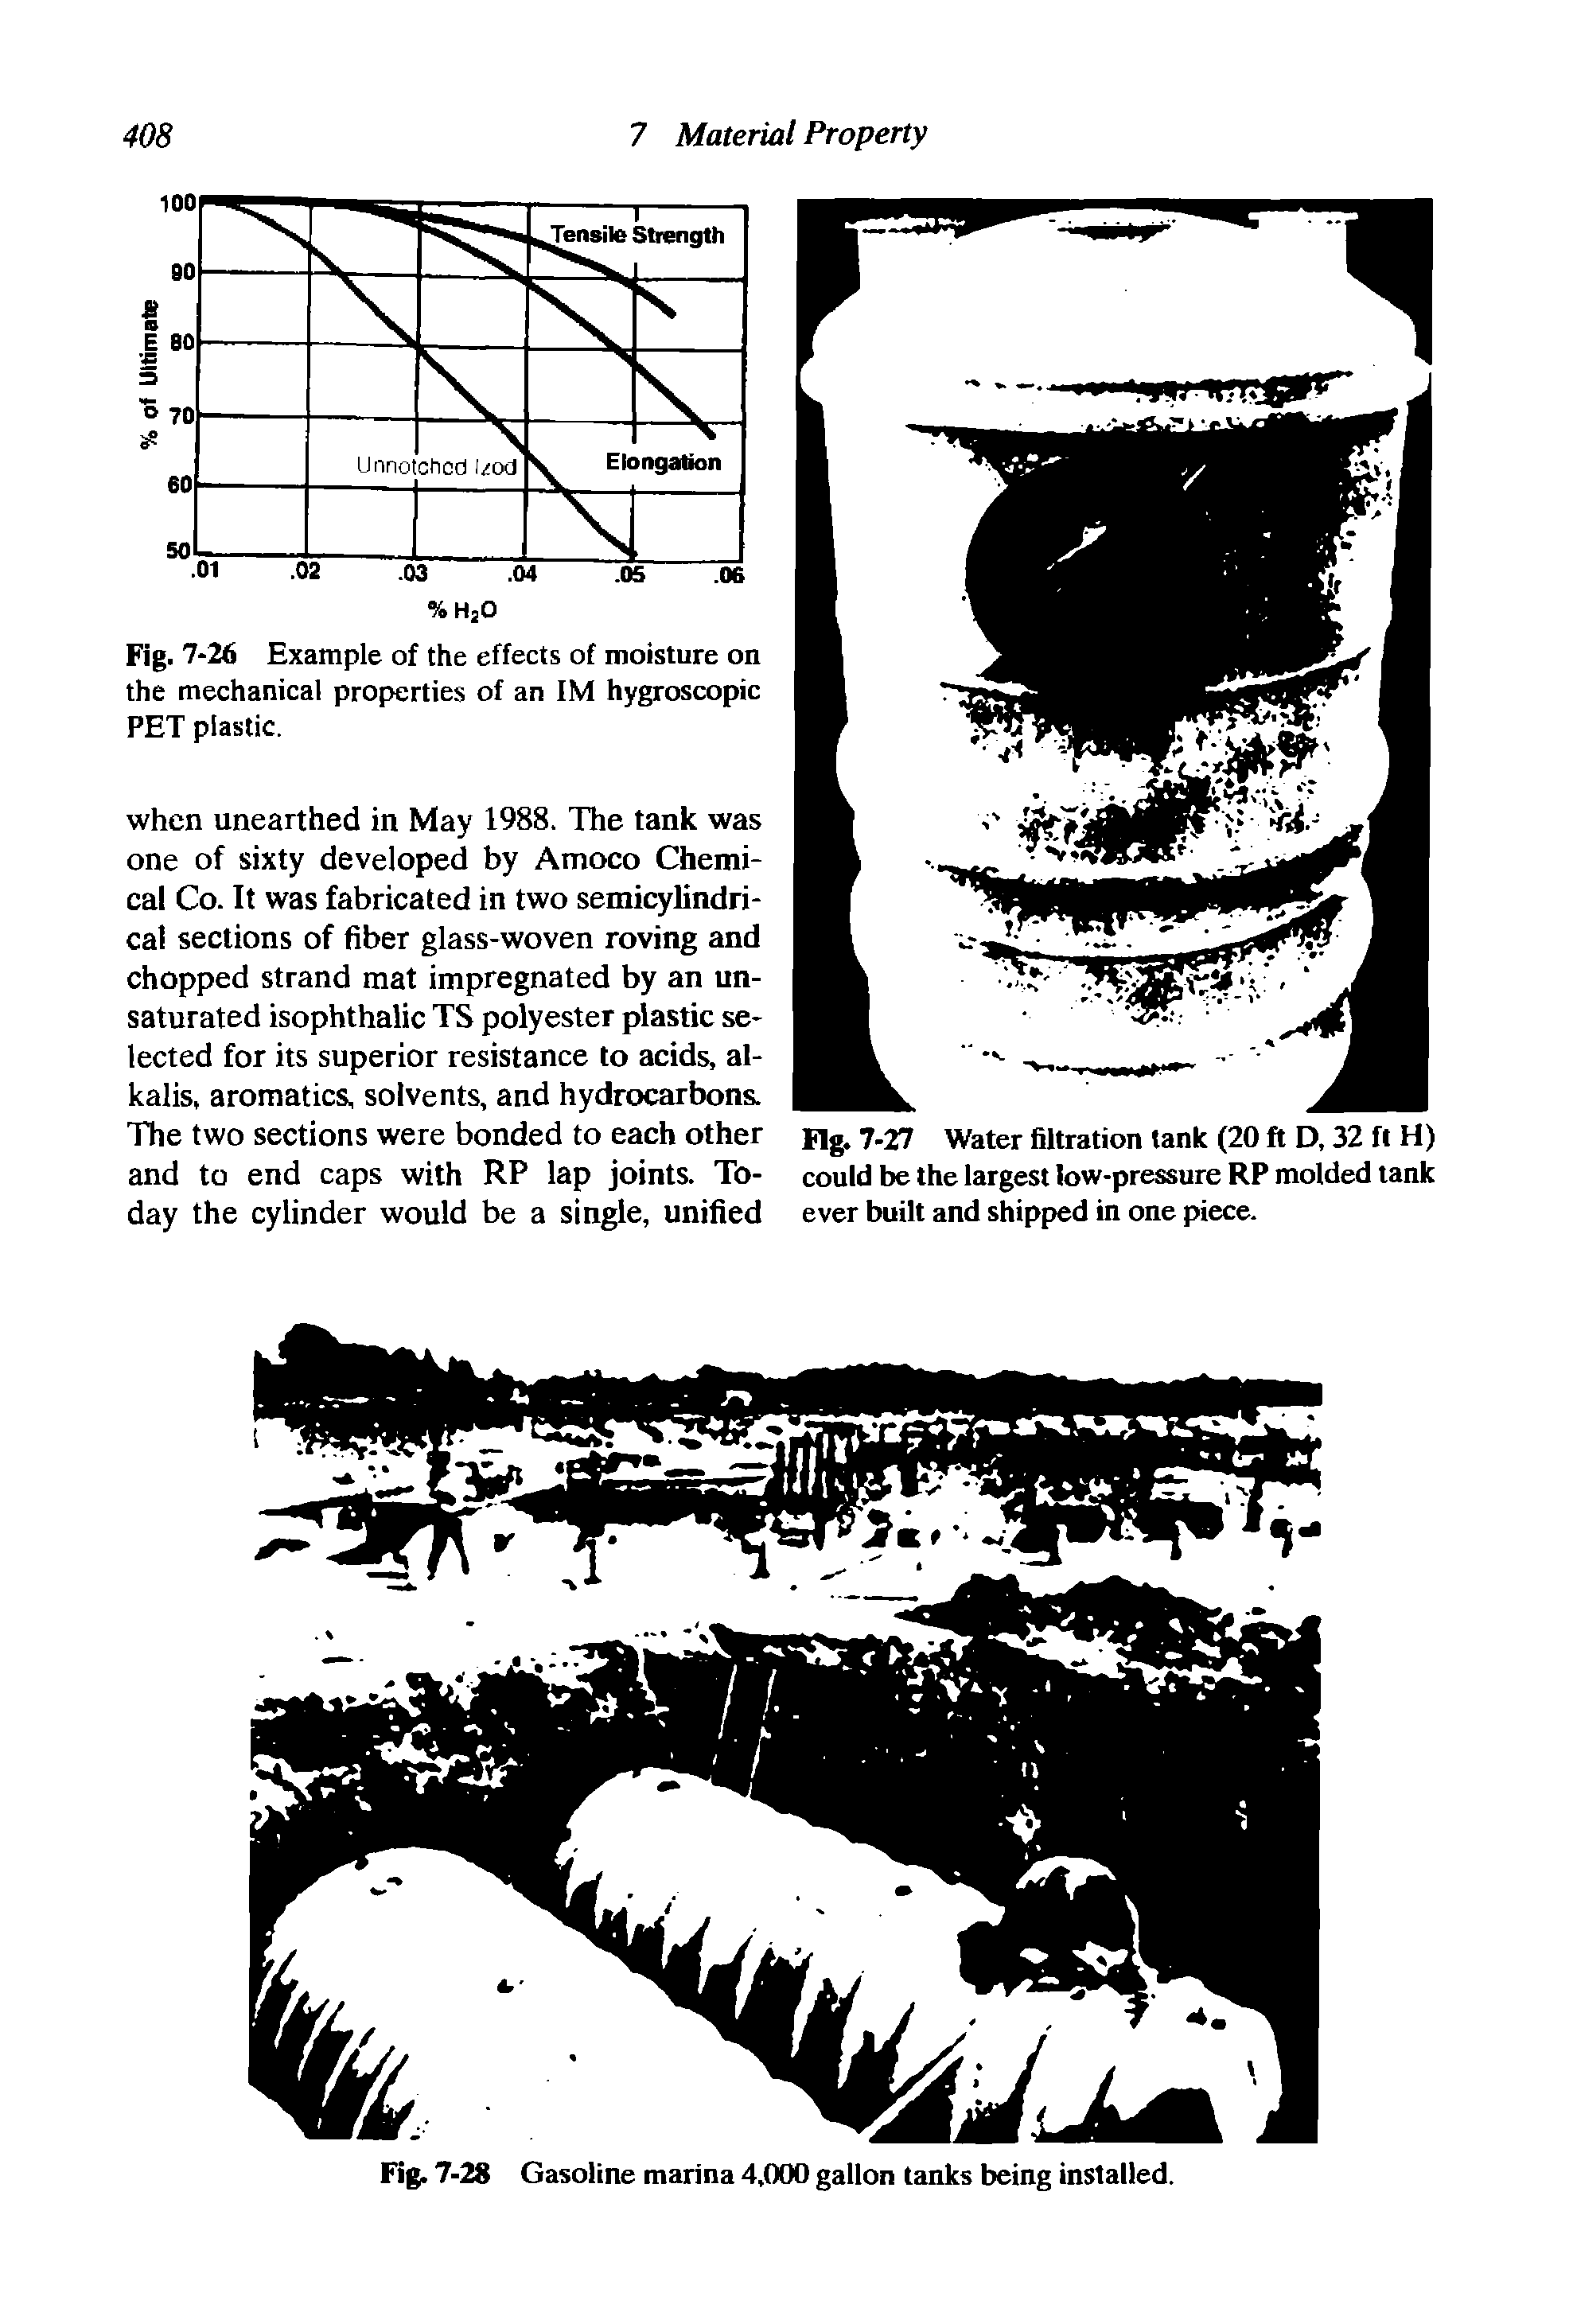 Fig. 7-26 Example of the effects of moisture on the mechanical properties of an IM hygroscopic PET plastic.